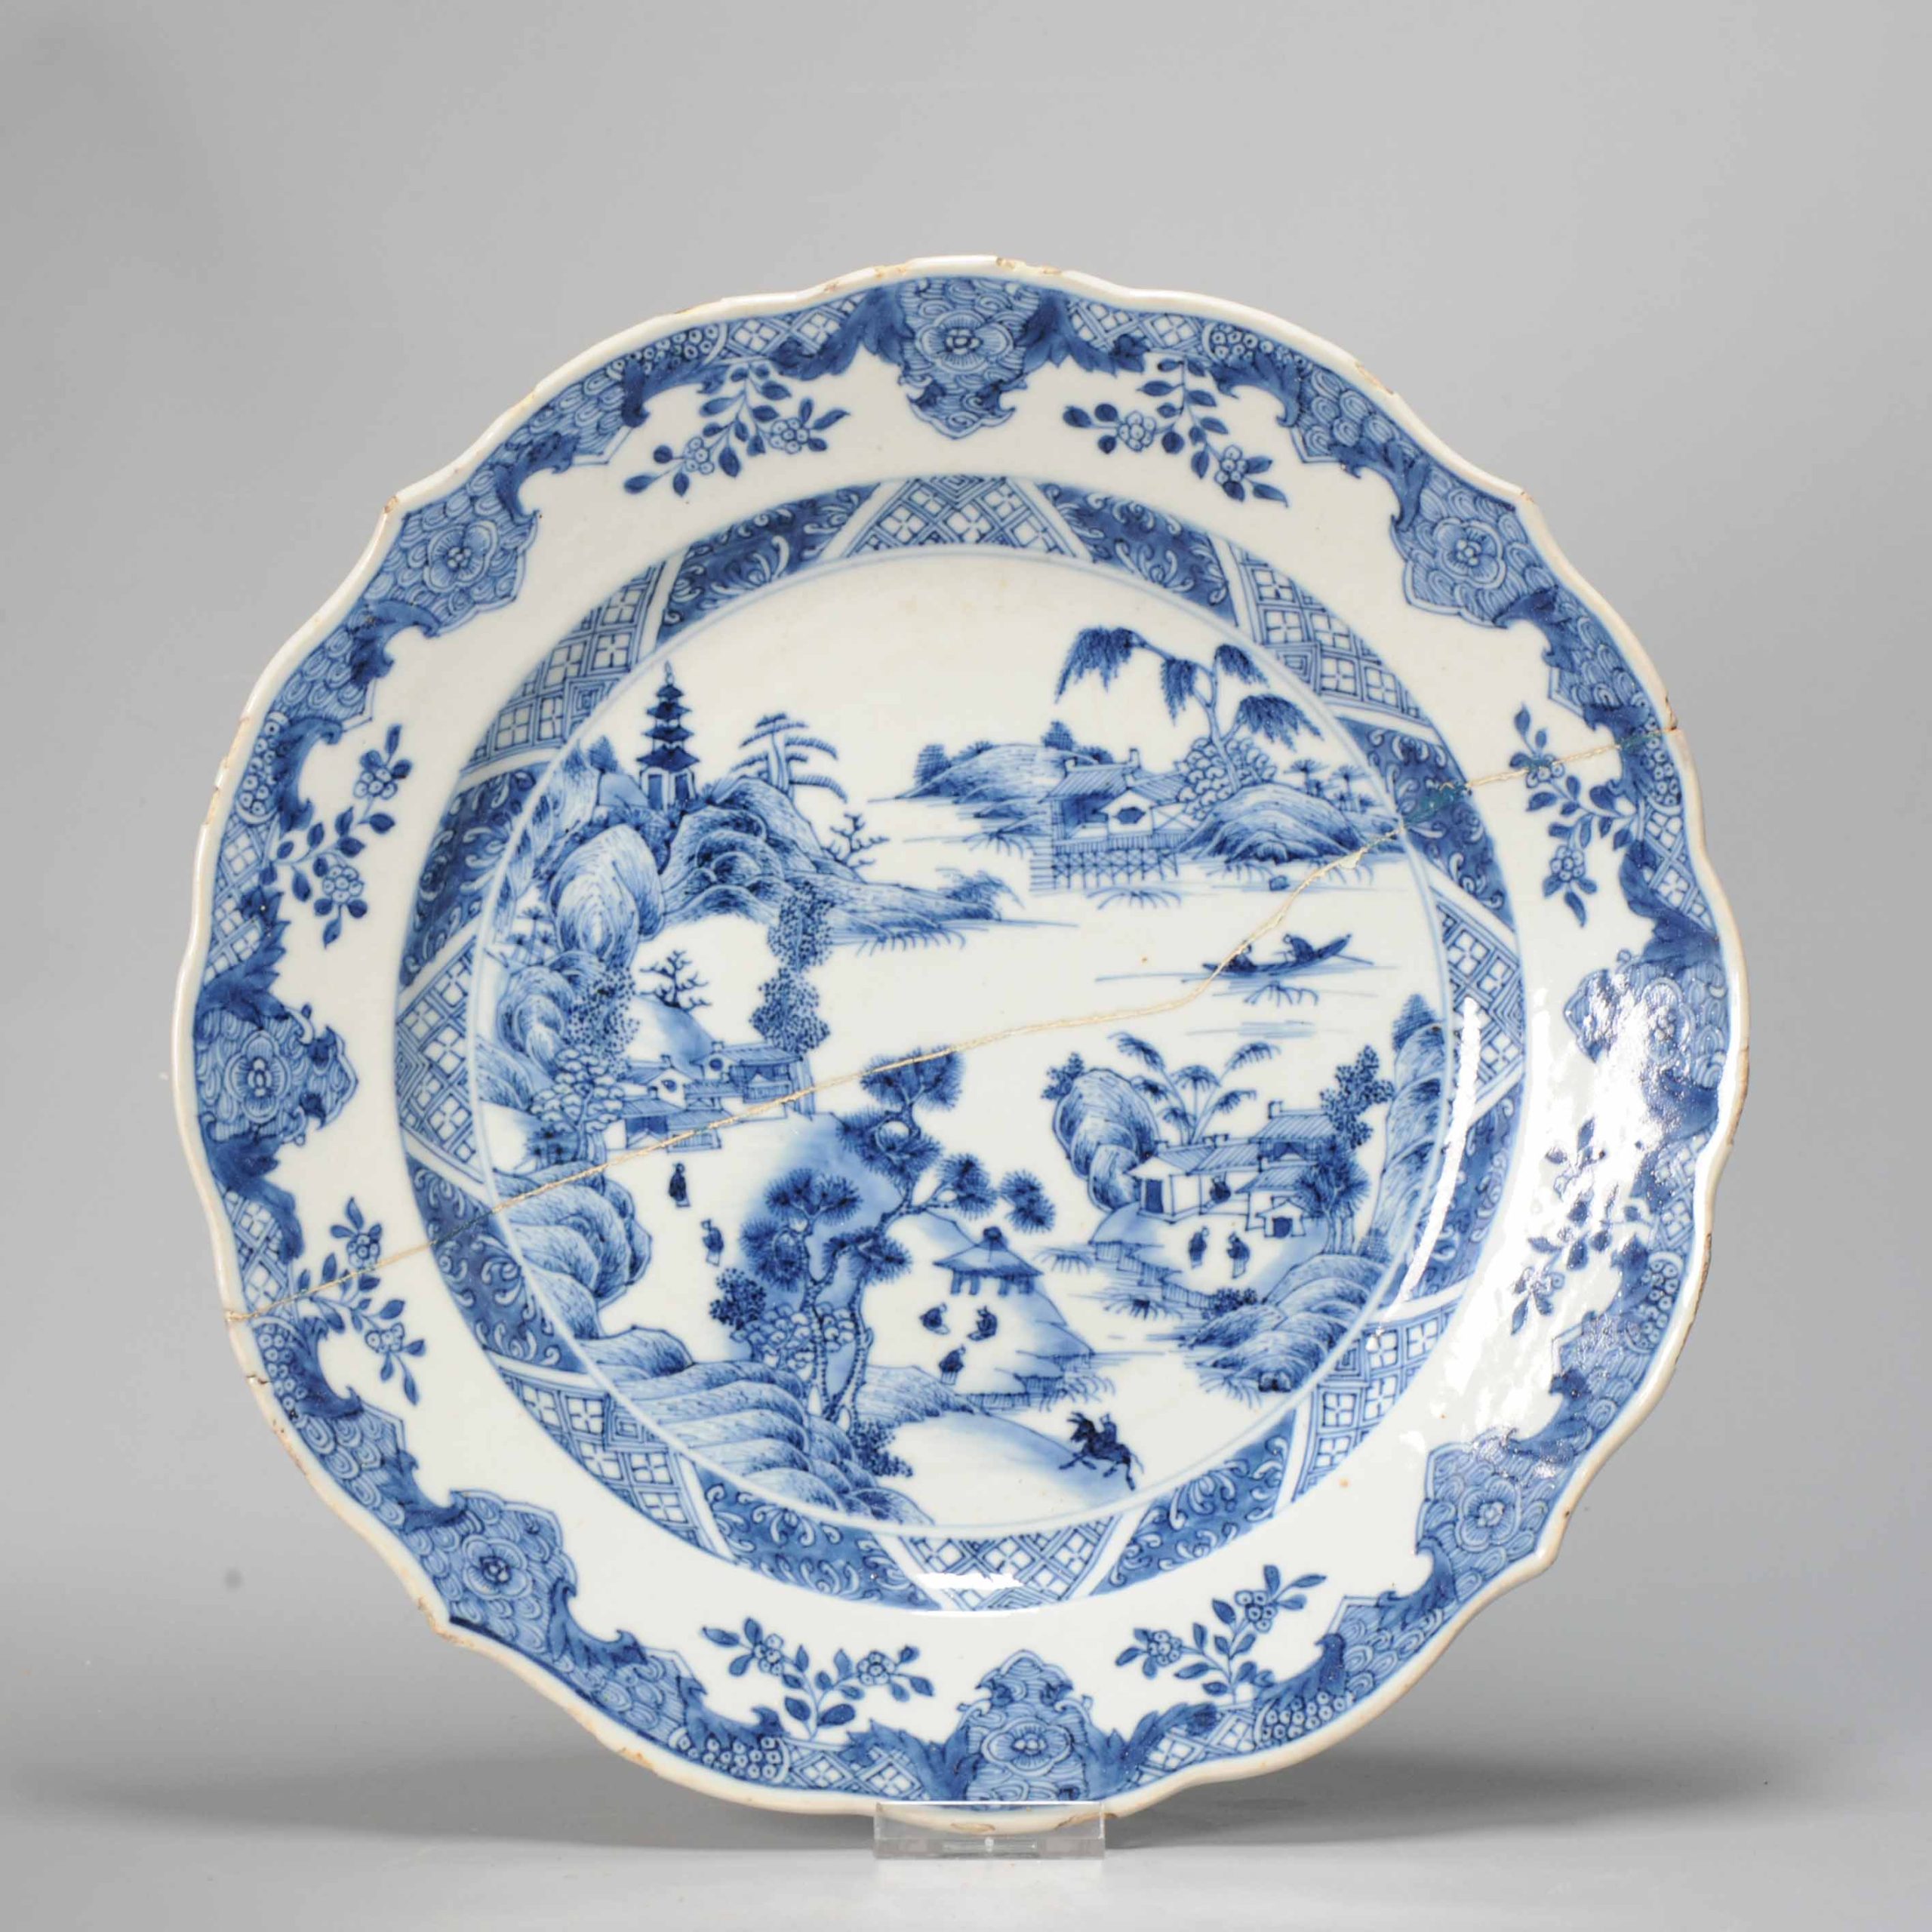 0757 Antique Charger / Plate with Blue and White Landscape including many figures(1736-1795)